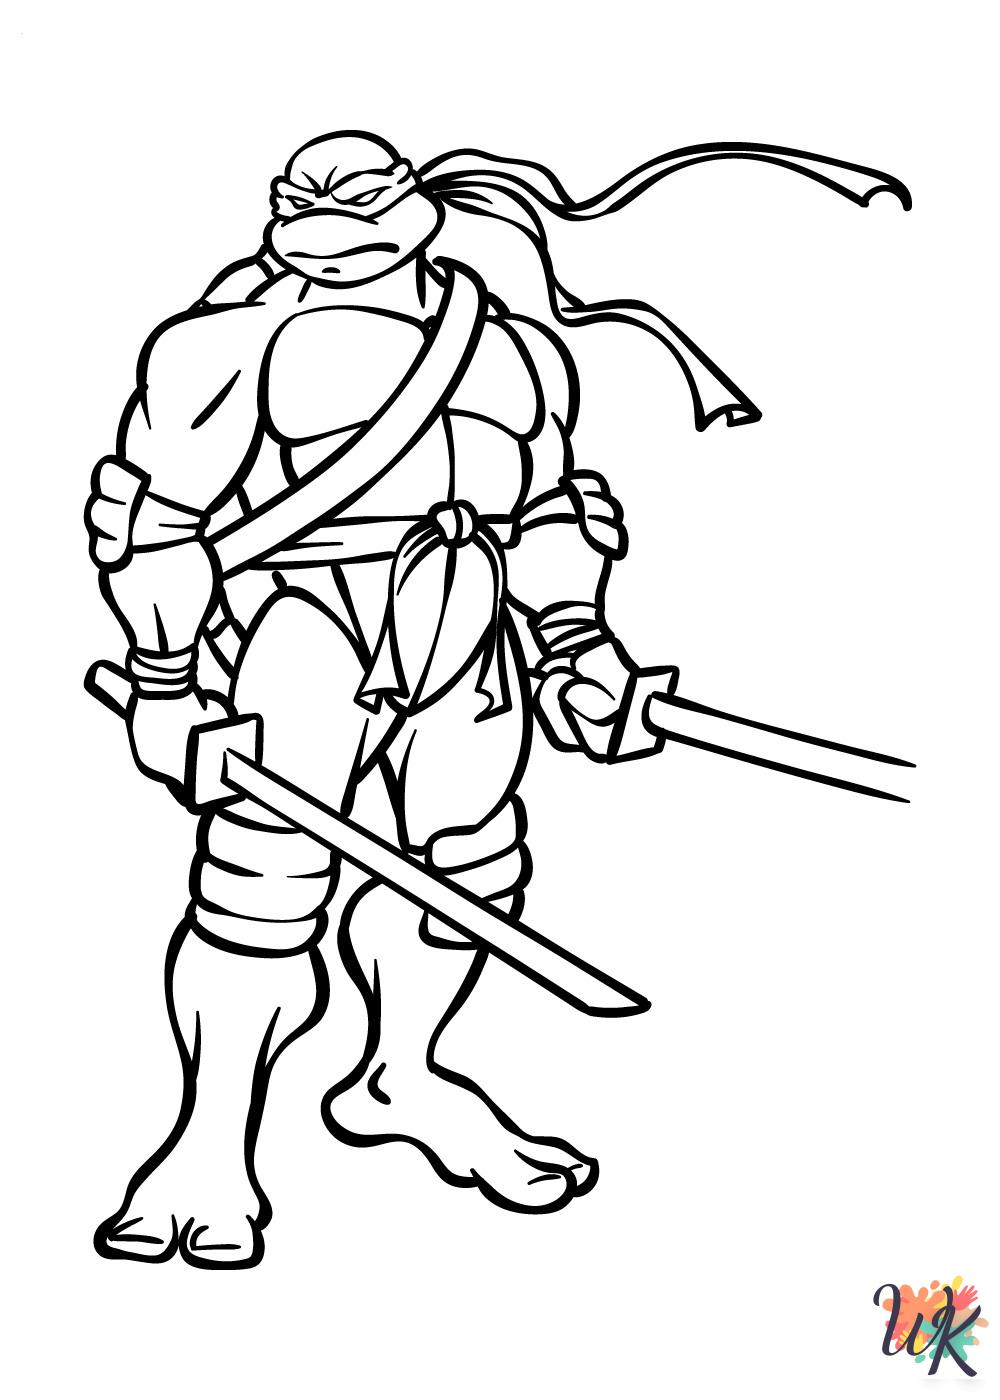 Ninja Turtles coloring pages grinch